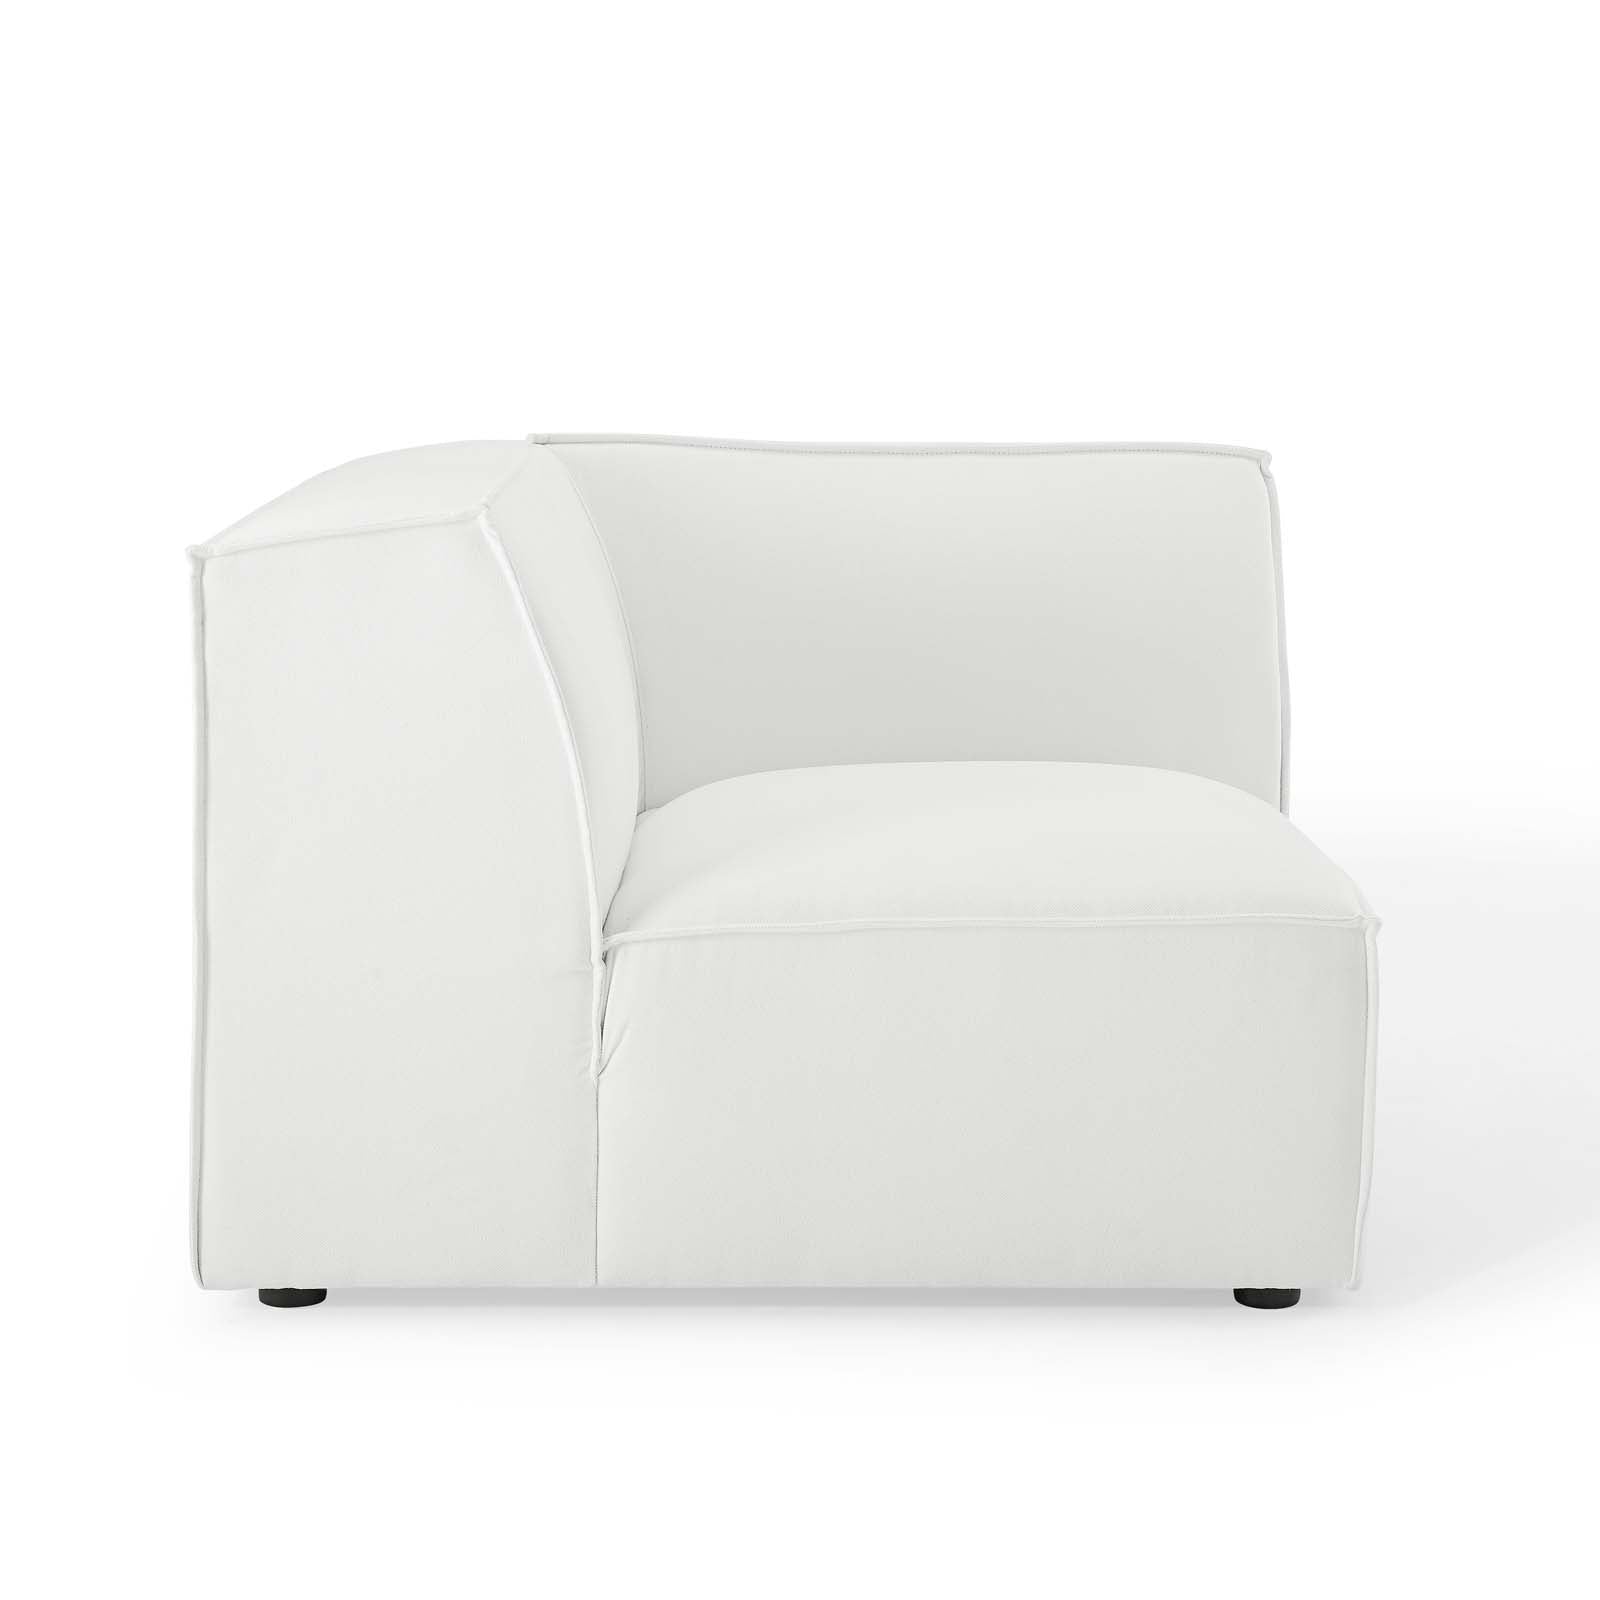 Modway Accent Chairs - Restore Sectional Sofa Corner Chair White